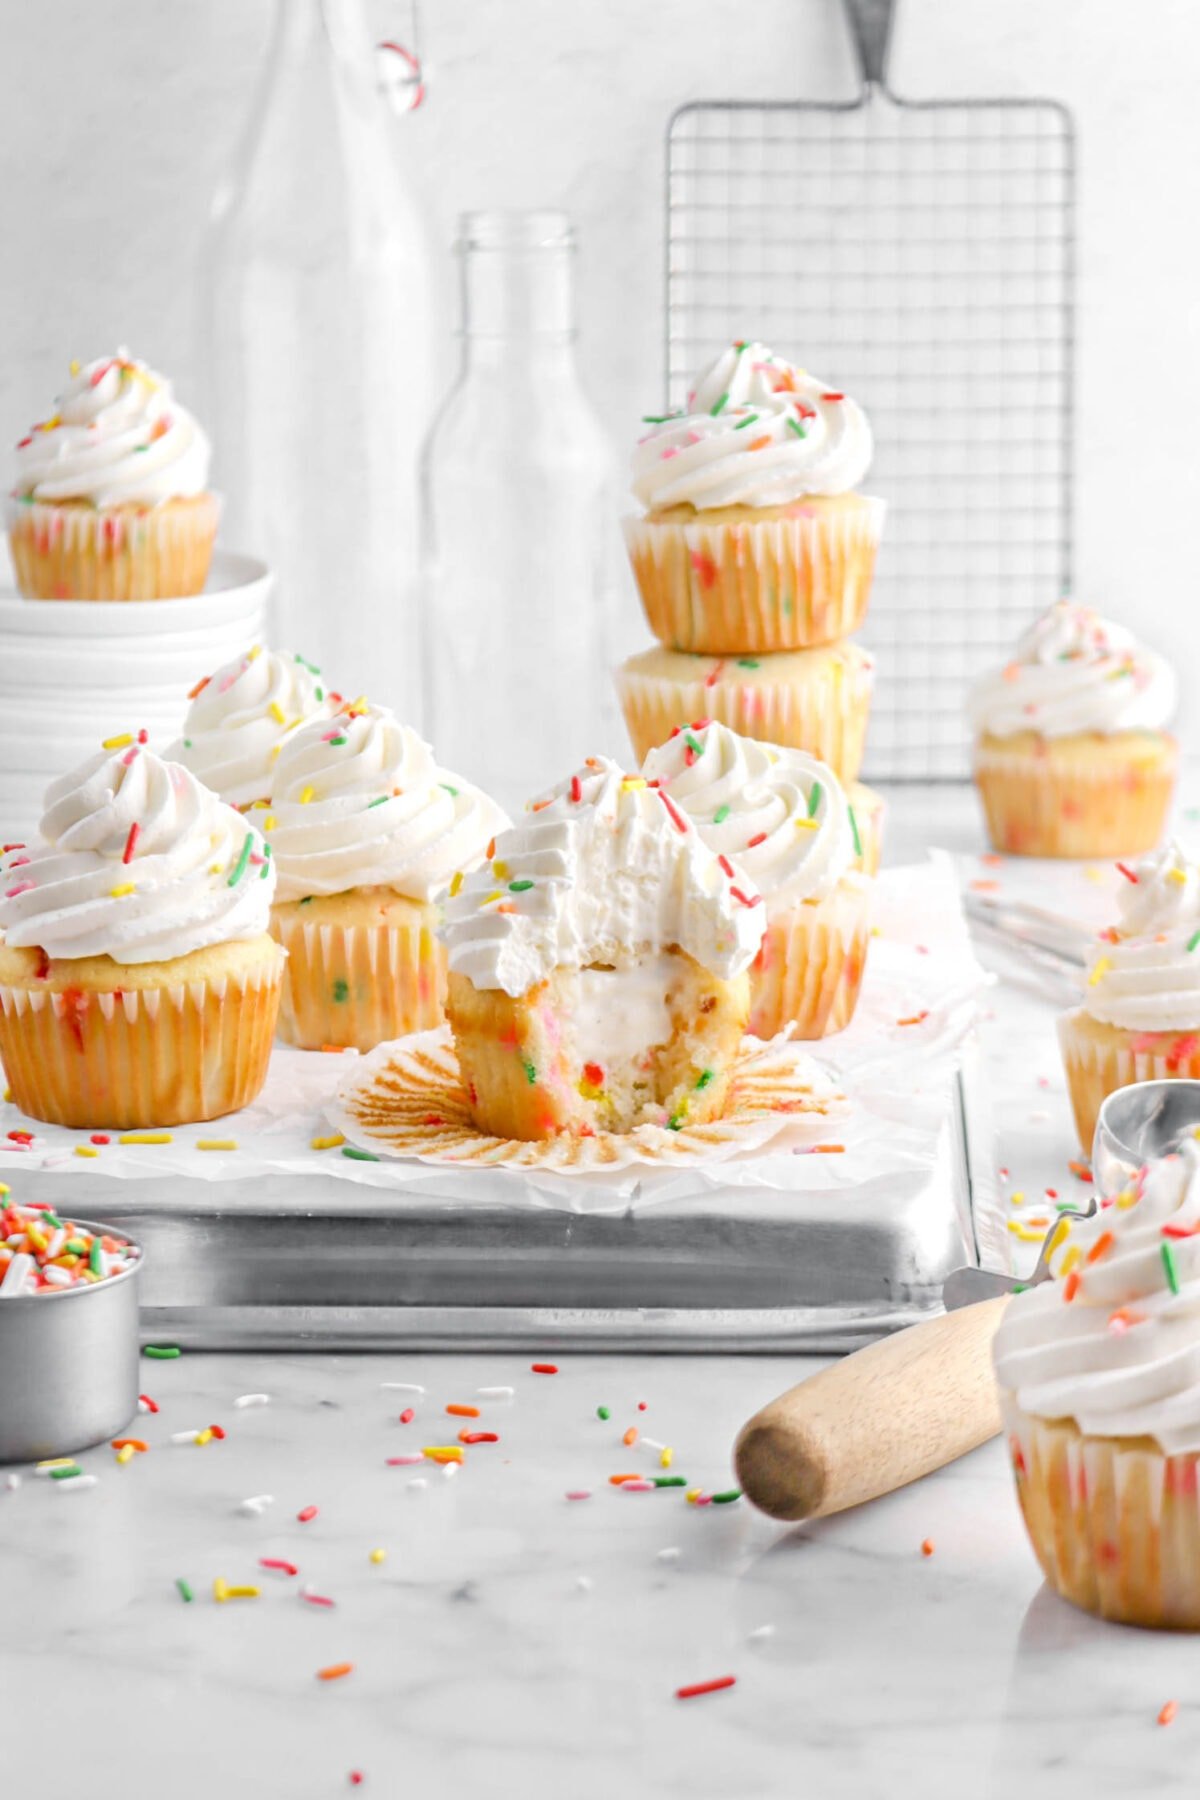 front shot of cupcake with bite missing, eleven more cupcakes around, stack of white plates and empty glasses behind, and rainbow sprinkles around